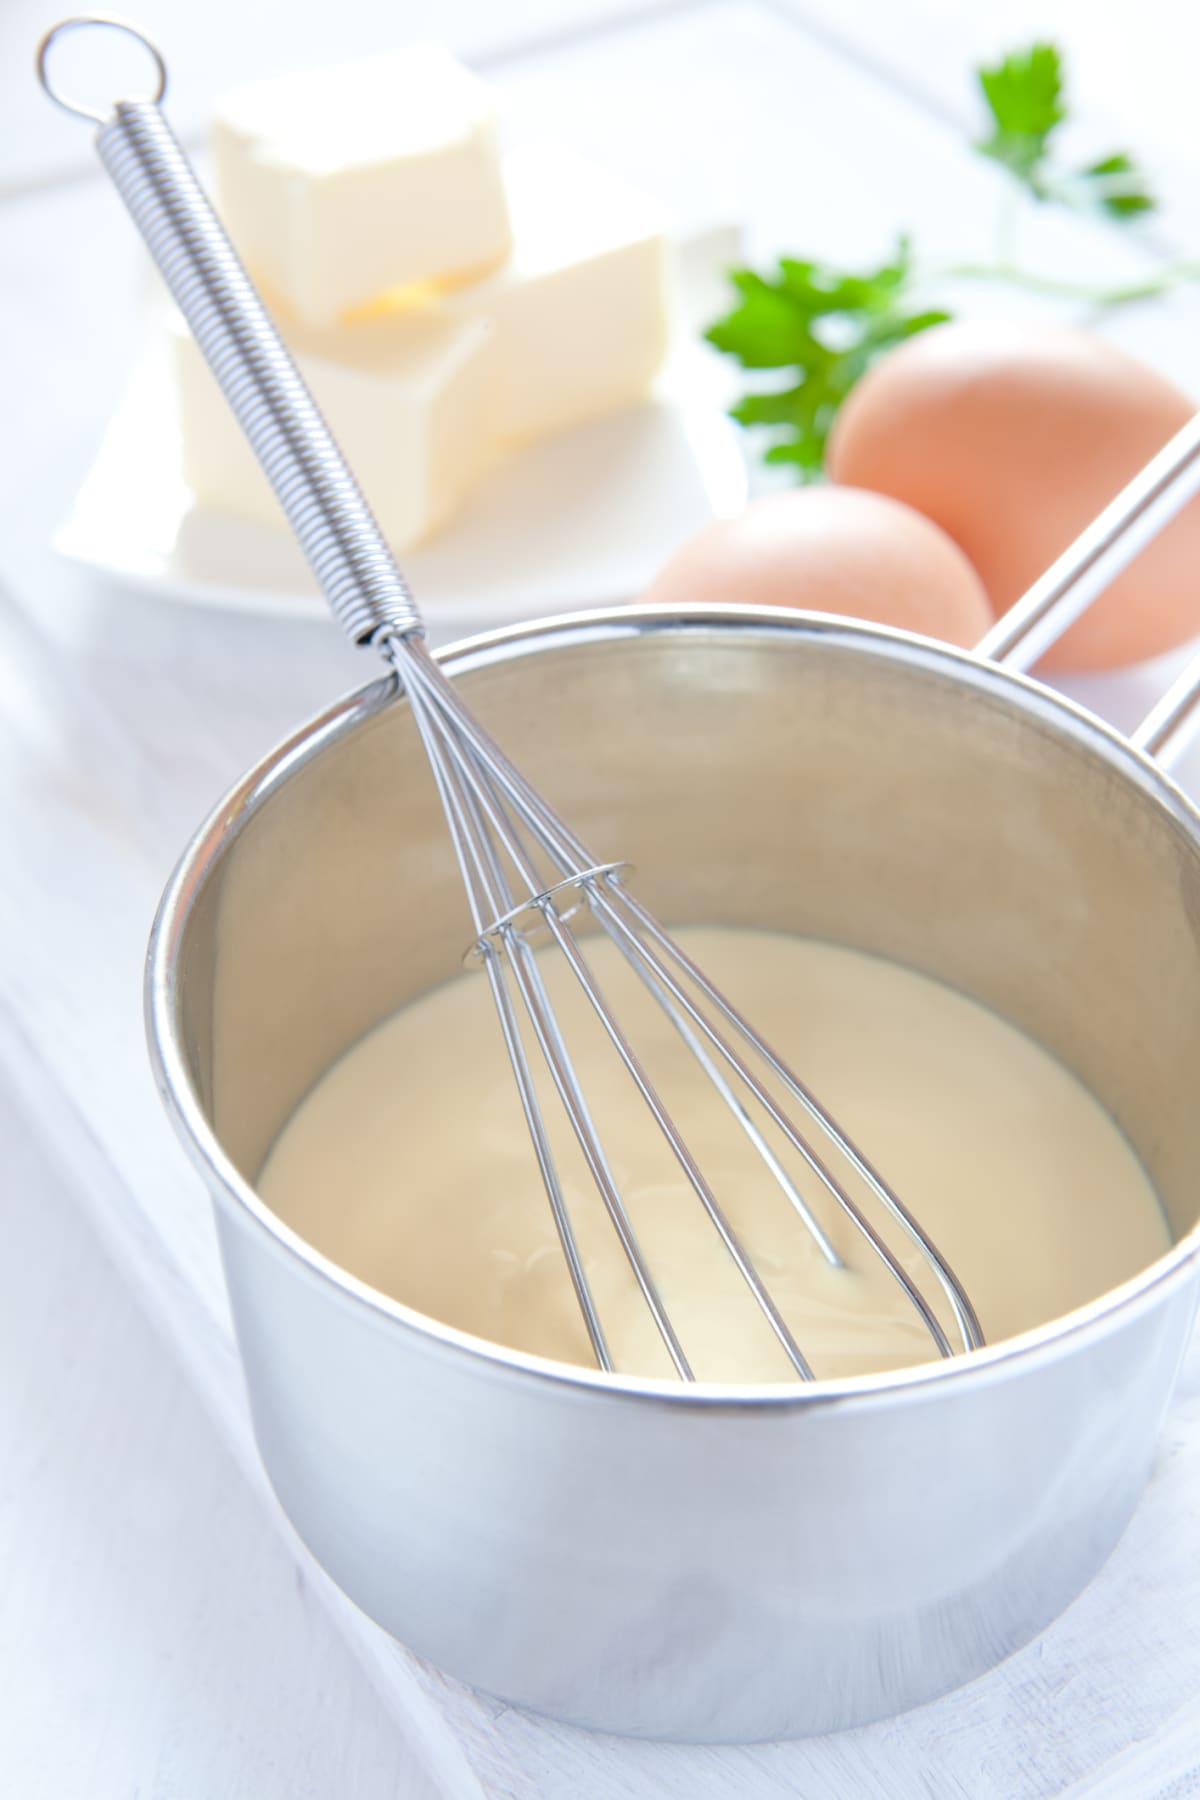 Pot of sauce with whisk